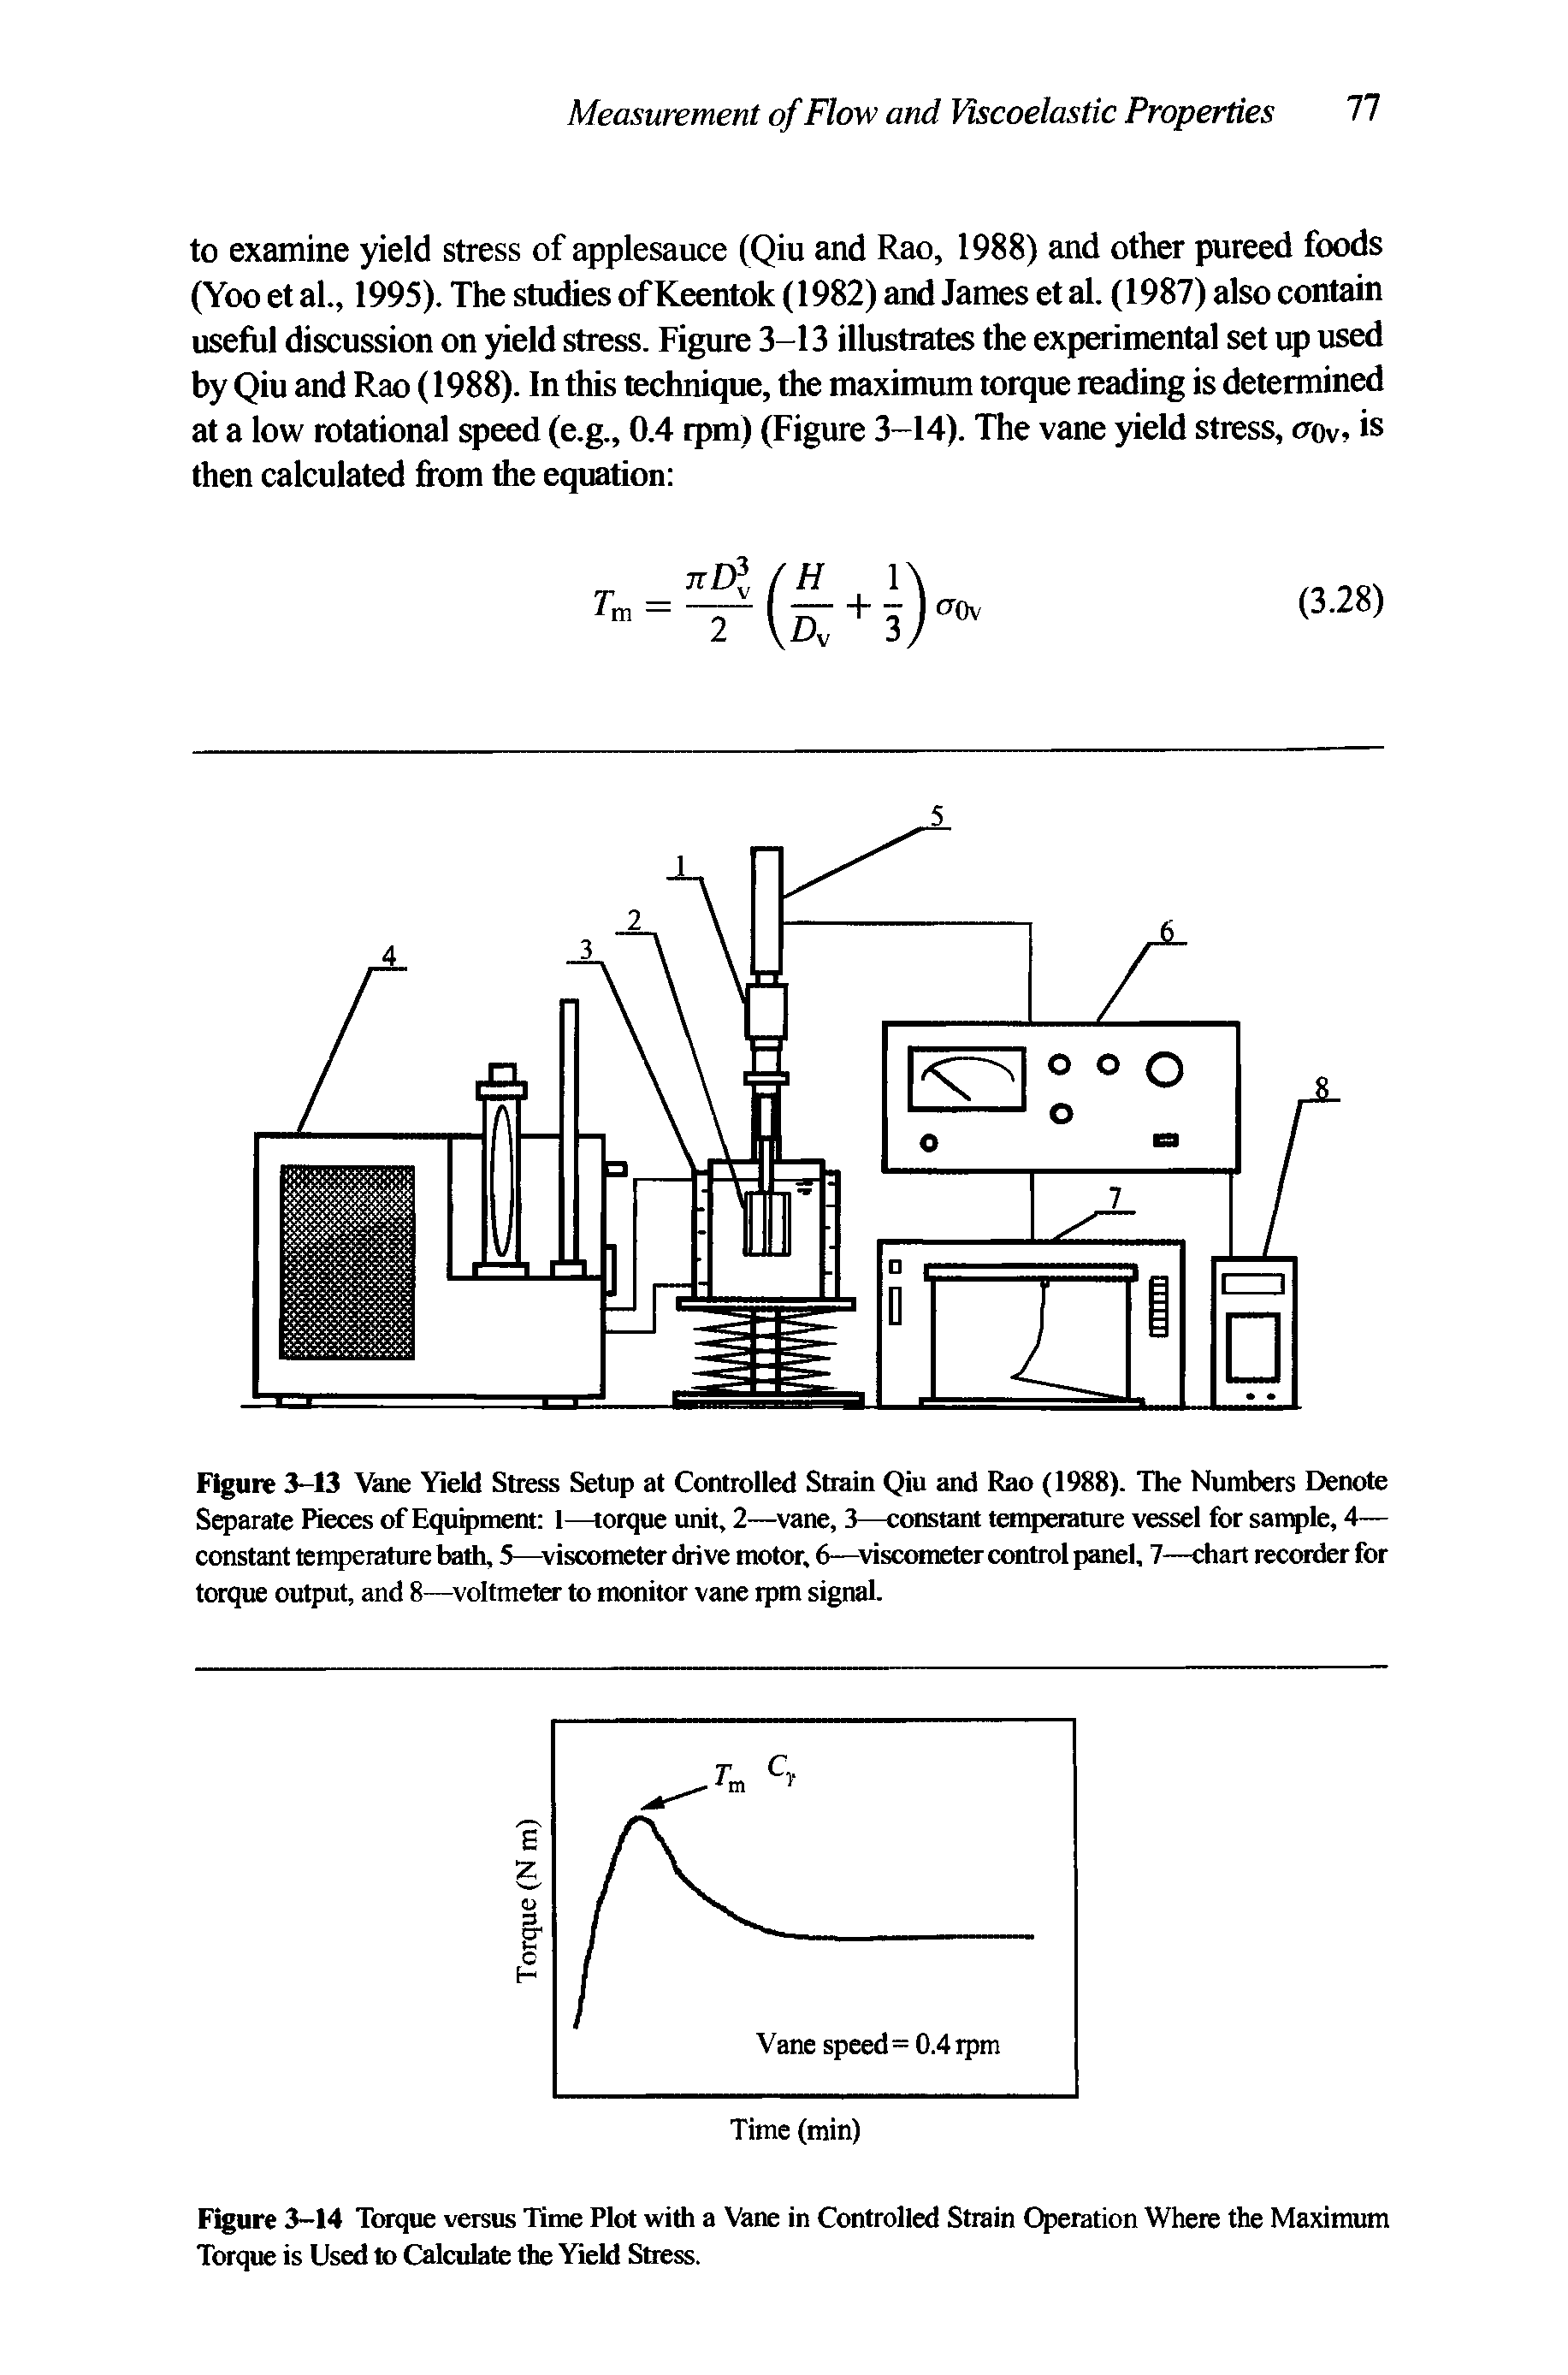 Figure 3-13 Vane Yield Stress Setup at Controlled Strain Qiu and Rao (1988). The Numbers Denote Separate Pieces of Equipment 1—torque unit, 2—vane, 3—constant temperature vessel for sample, 4— constant temperature bath, 5—viscometer drive motor, 6—viscometer control panel, 7—chart recorder for torque output, and 8— voltmeter to monitor vane rpm signal.